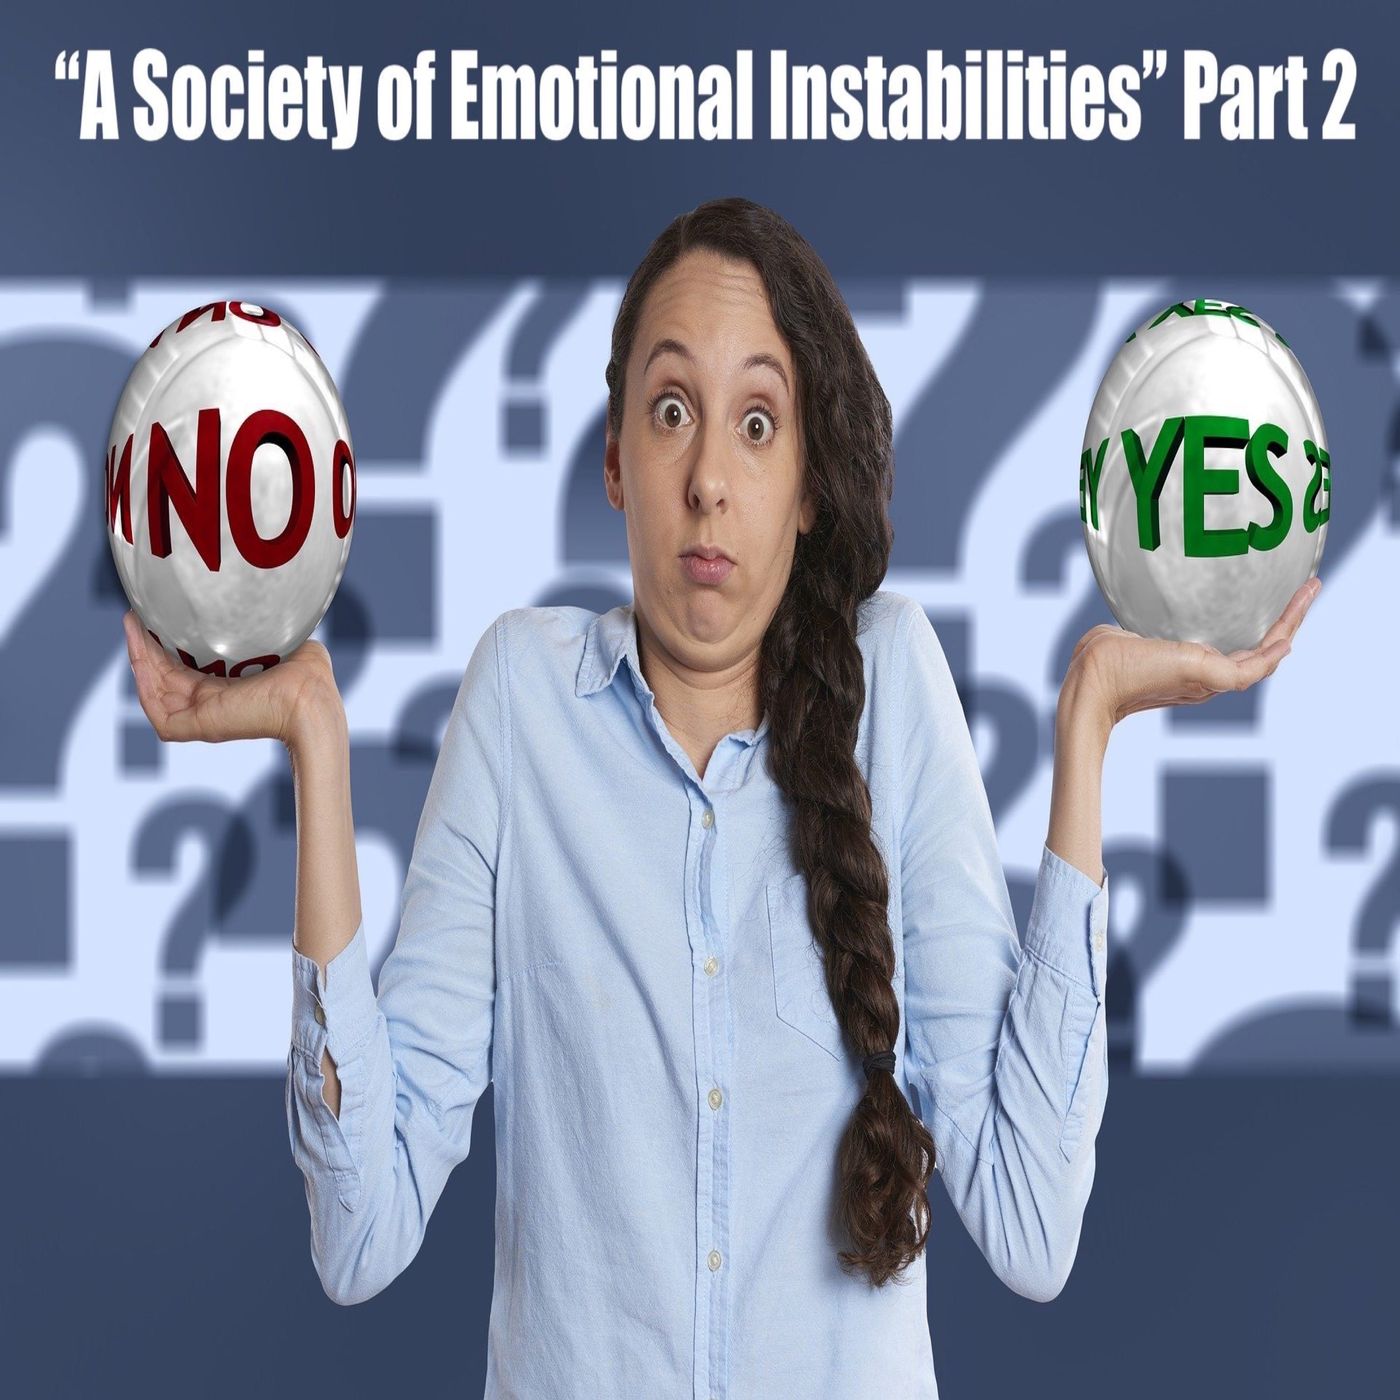 Episode 26 - "A Society of Emotional Instabilities" Part 2